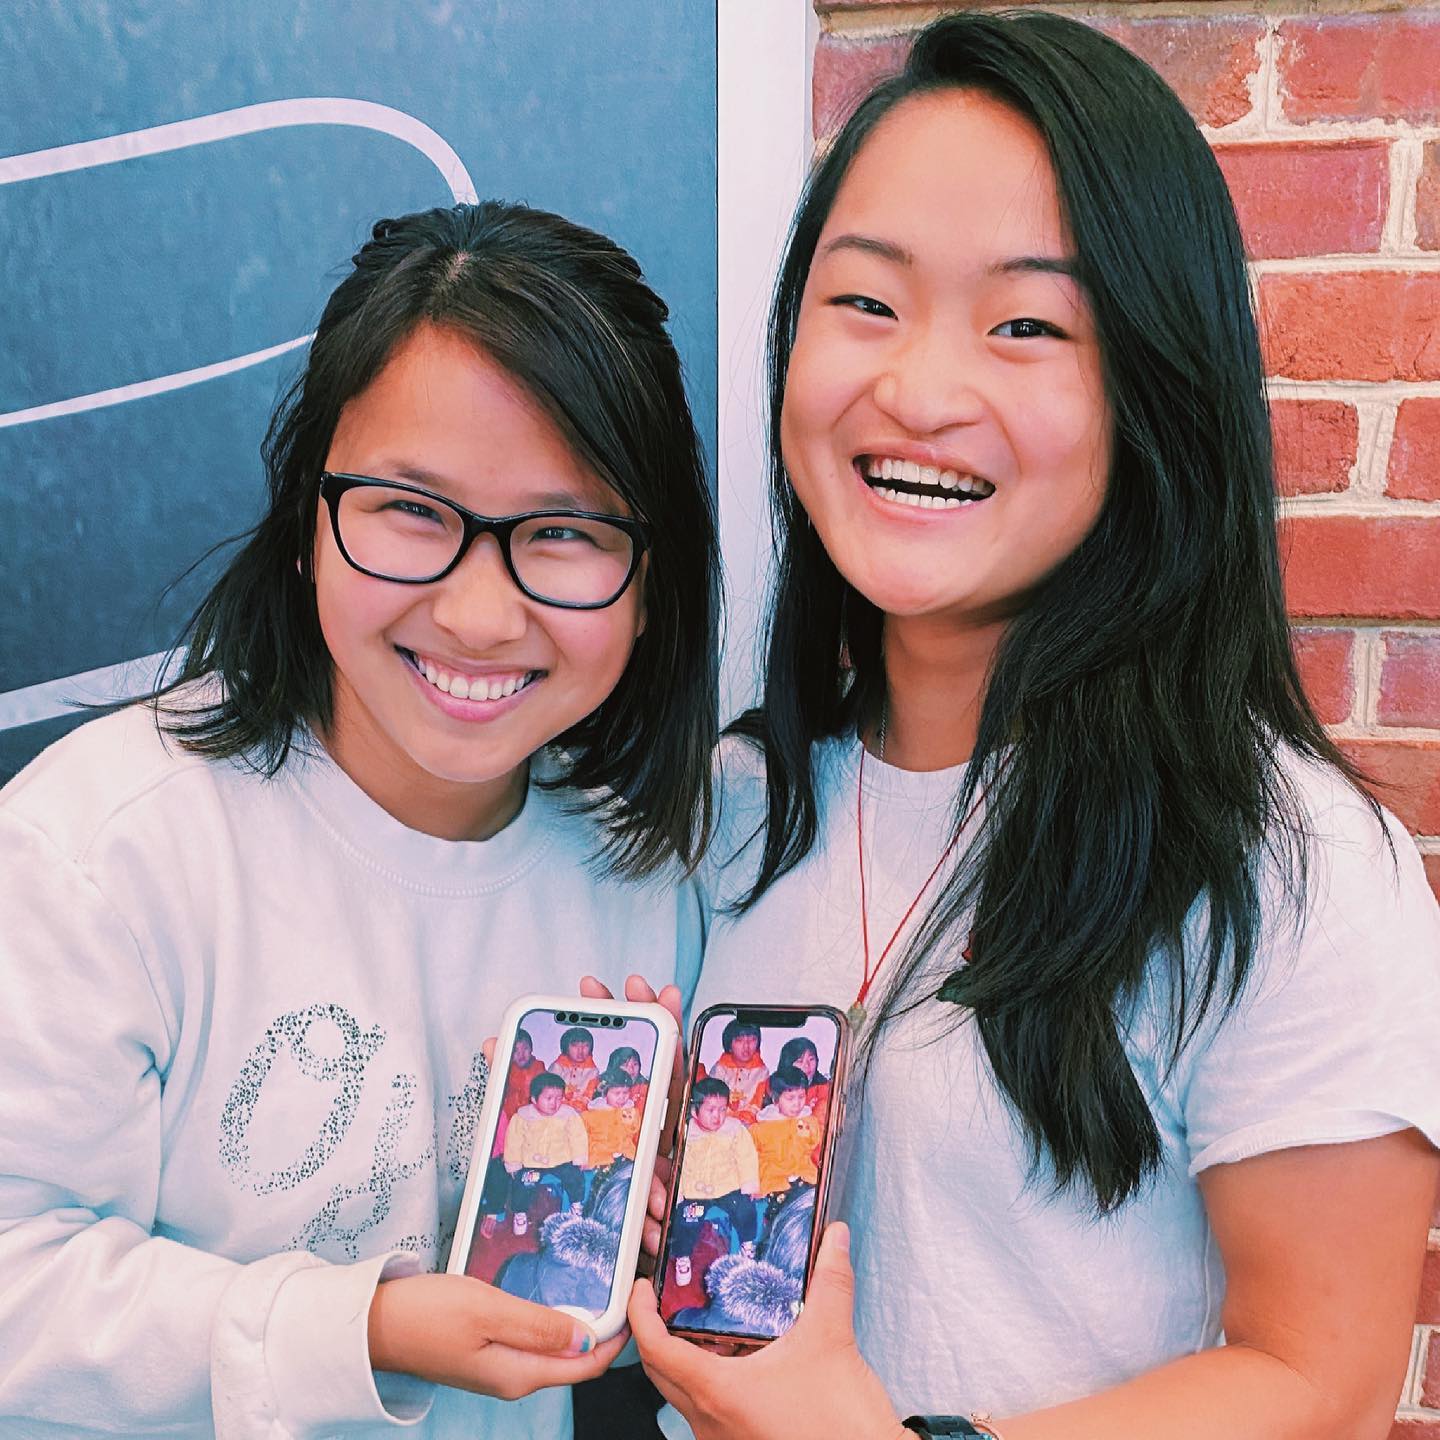 two young women named ally and ruby smiling and posing with identical photos of themselves in a chinese orphanage when they were kids on their phones